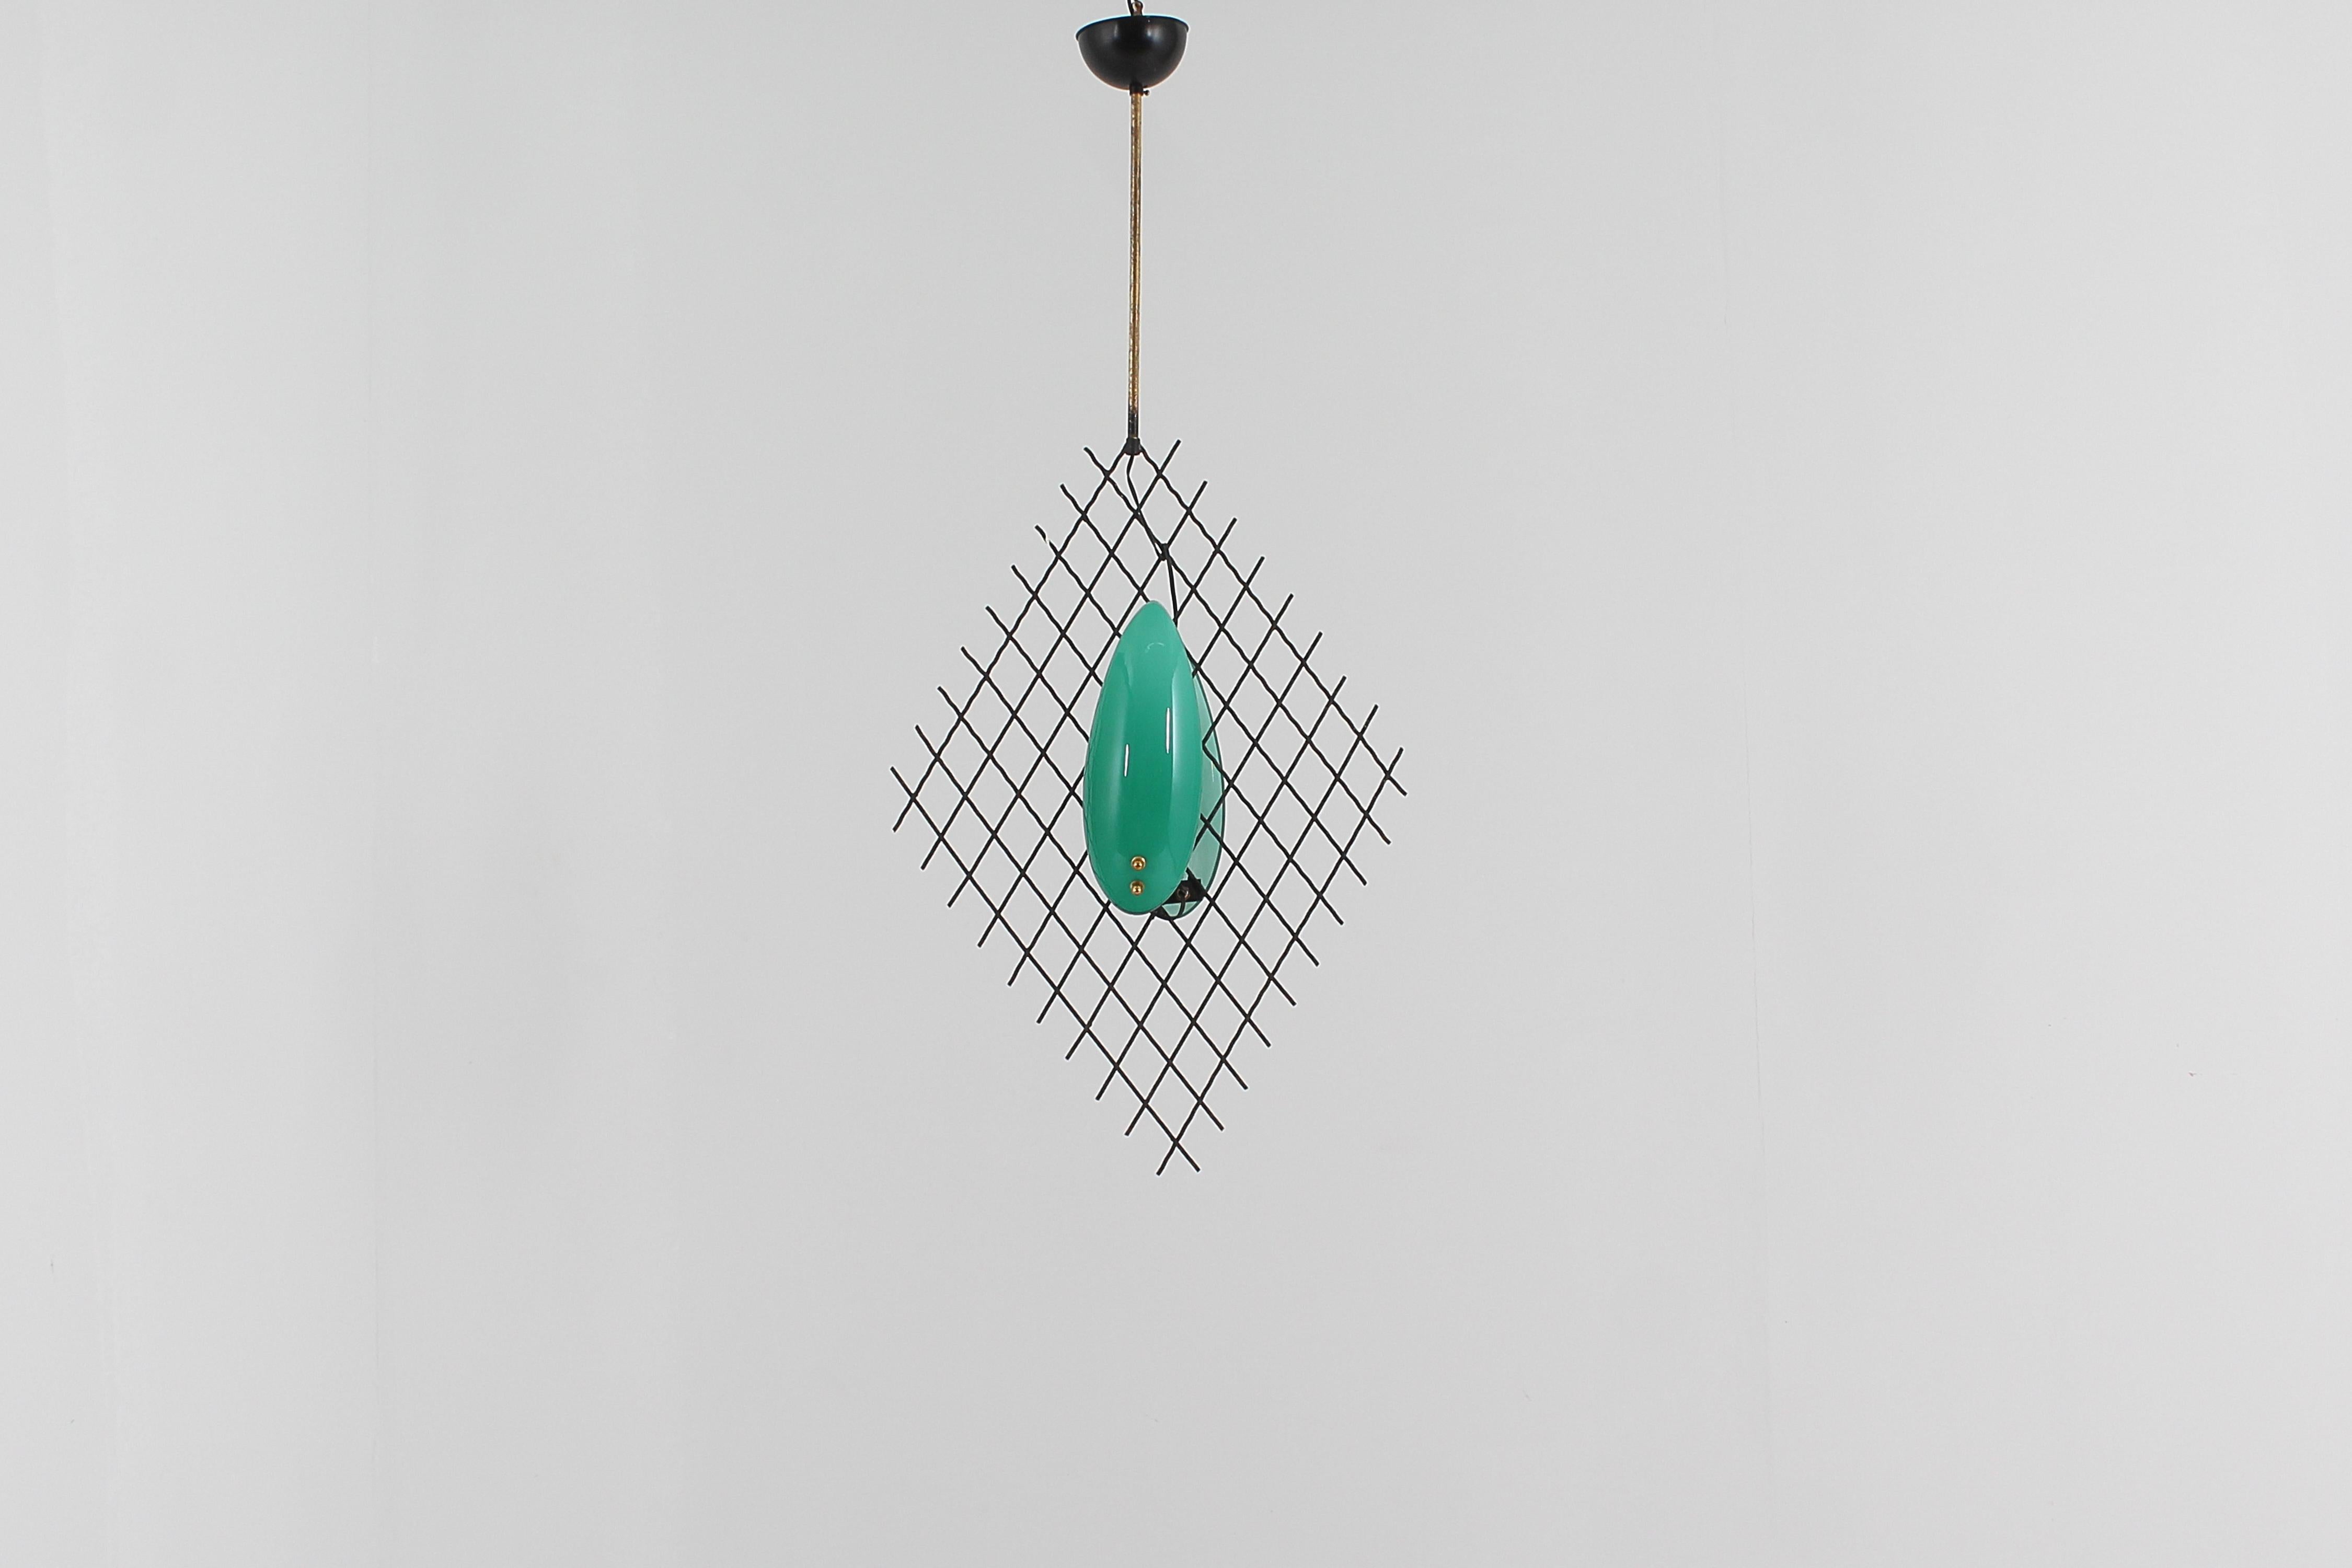 Beautiful suspension lamp with rhombus structure in black metal mesh supported by a brass rod, with two shell diffusers in emerald green overlay Murano glass. Attributable to Arredoluce Monza, Italian production in the 70s
Wear consistent with age